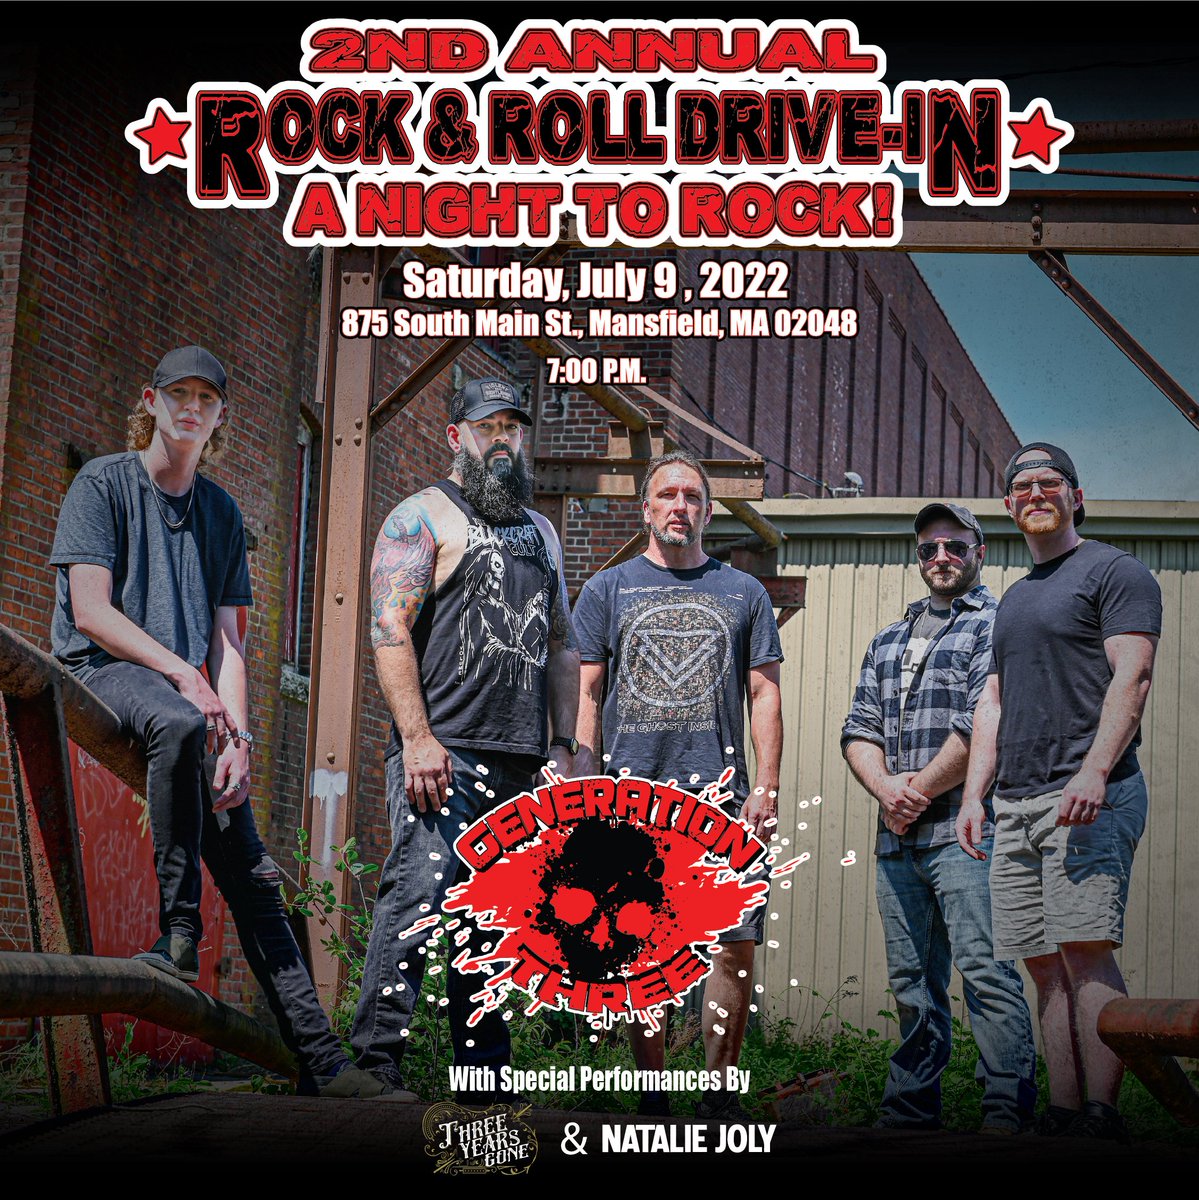 We're only two days away from our 2nd annual Rock & Roll Drive In - A Night to Rock! You're not going to want to miss out on this epic night! All proceeds from ticket sales benefit Music Drives Us and our mission to keep music in our schools. bit.ly/3PfujzT